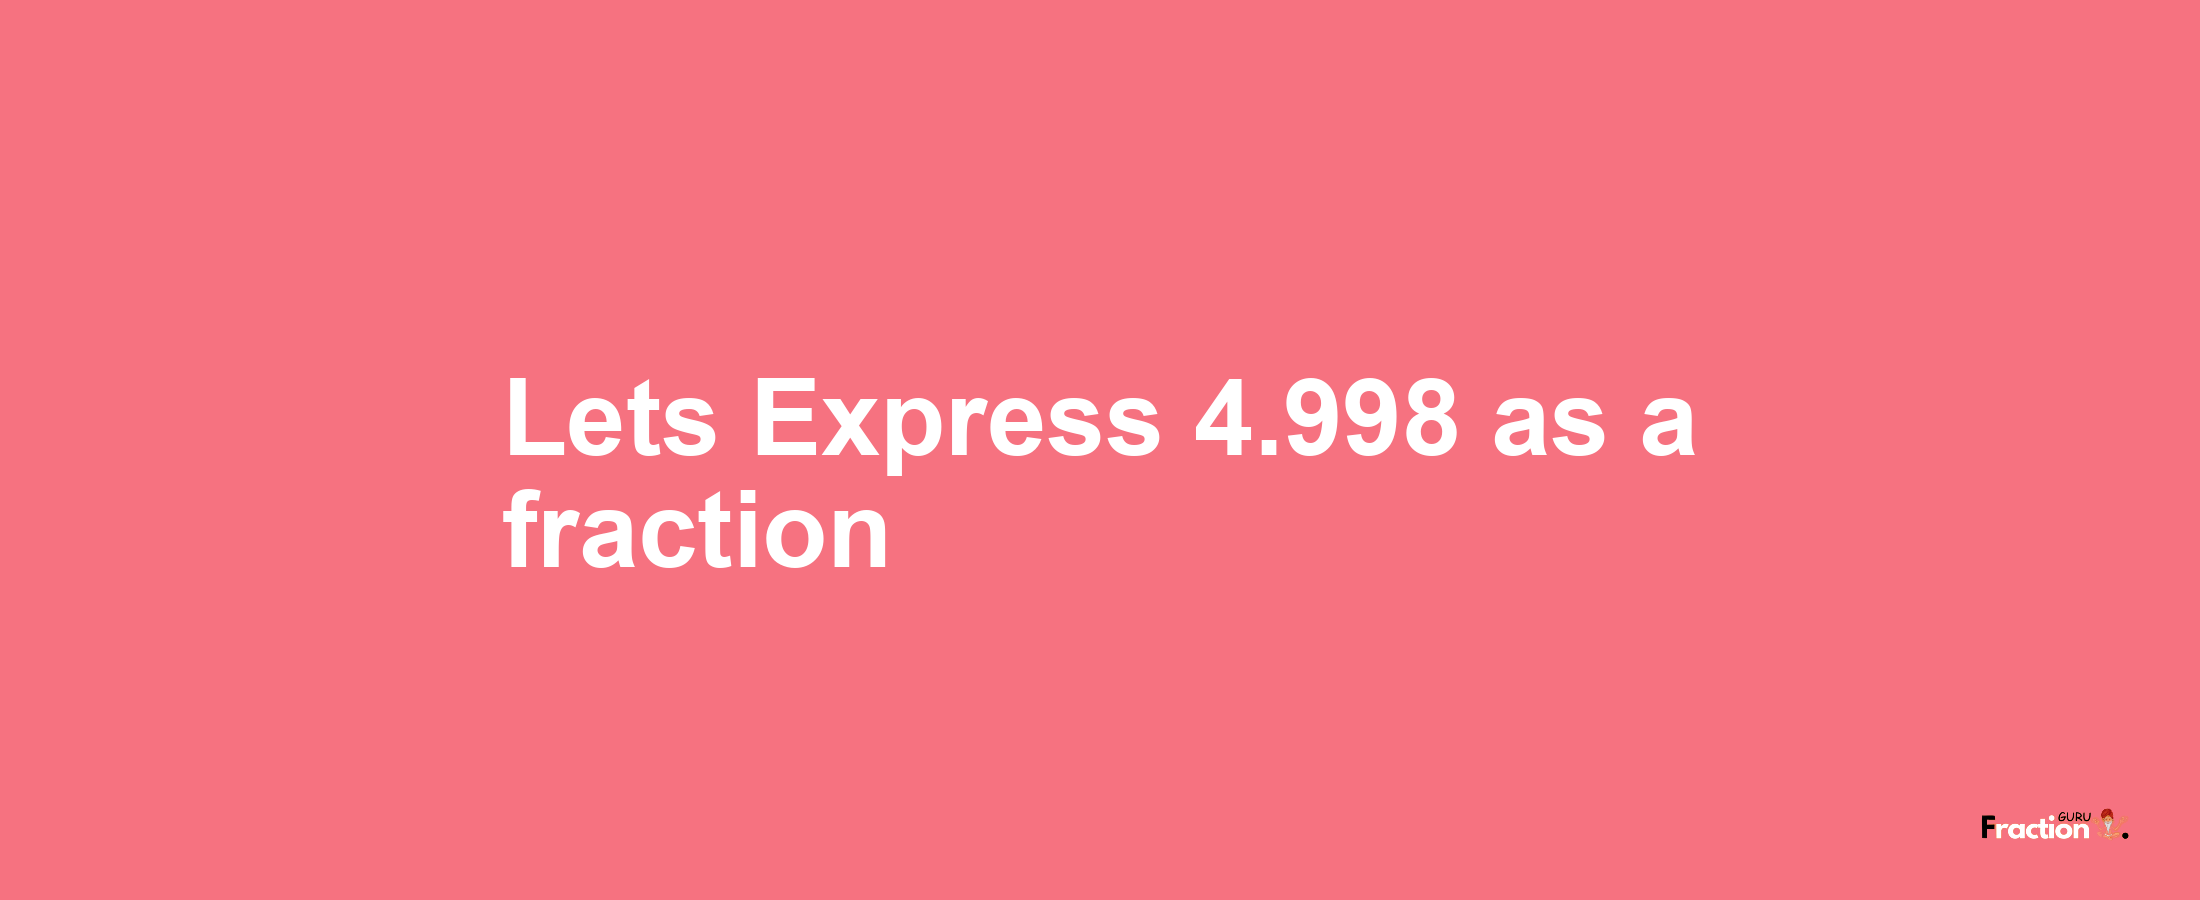 Lets Express 4.998 as afraction